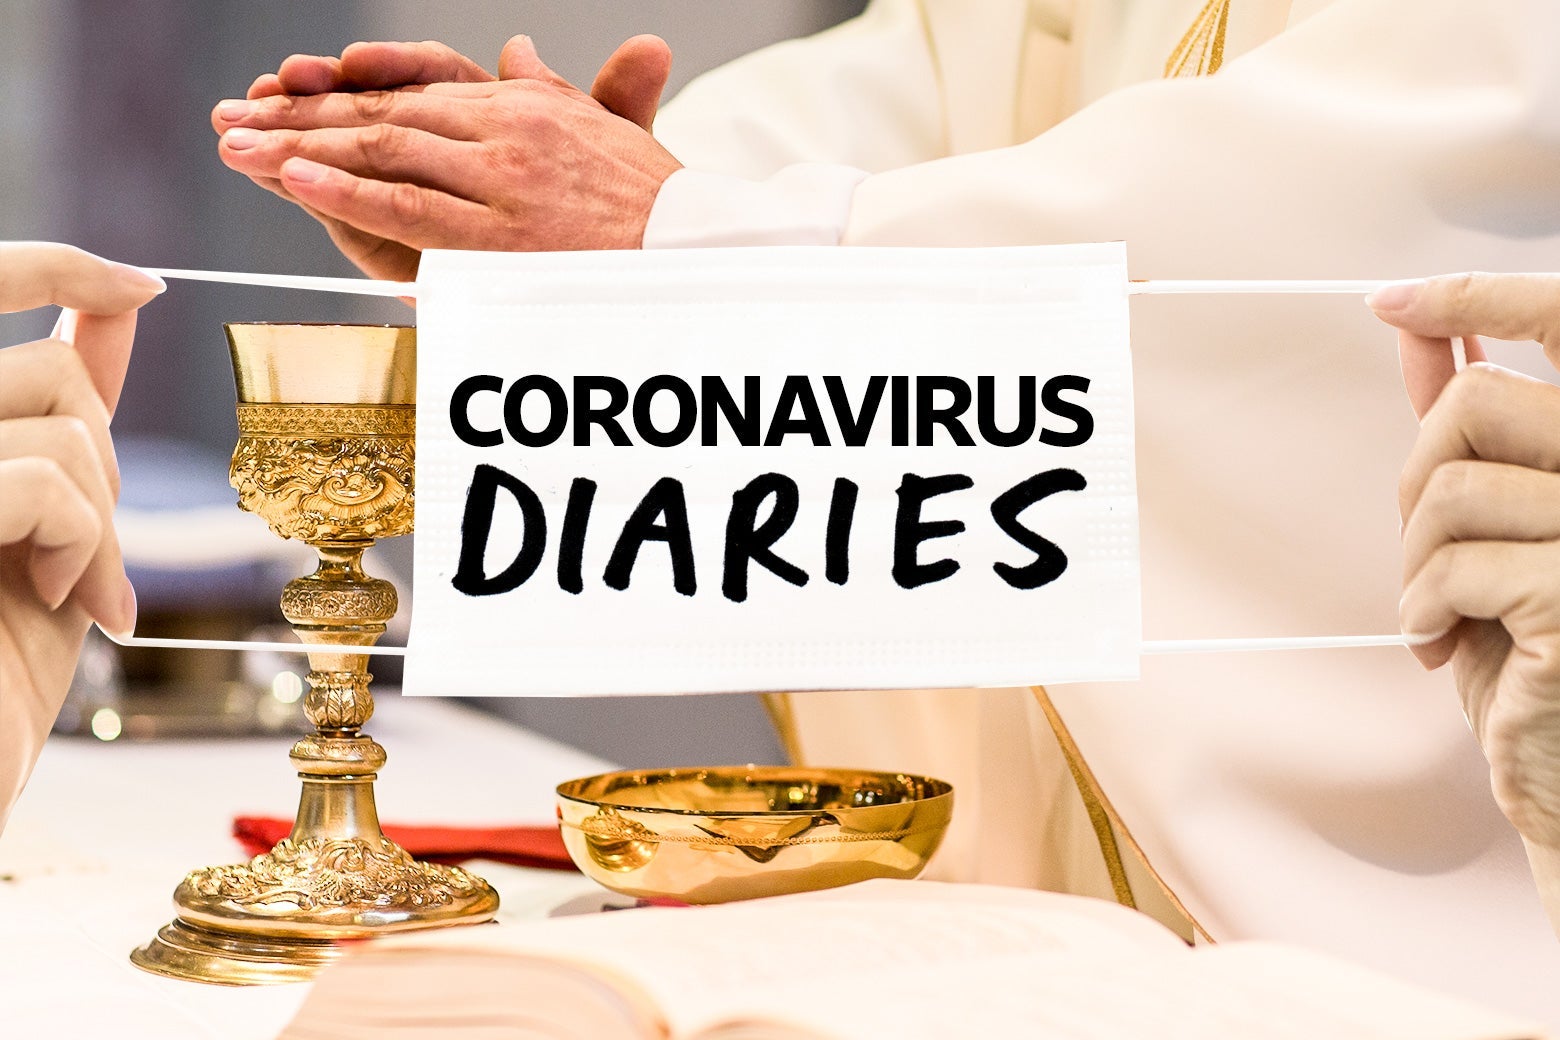 A priest blesses the salvation cup, with a sign that says "coronavirus diaries" written over it.